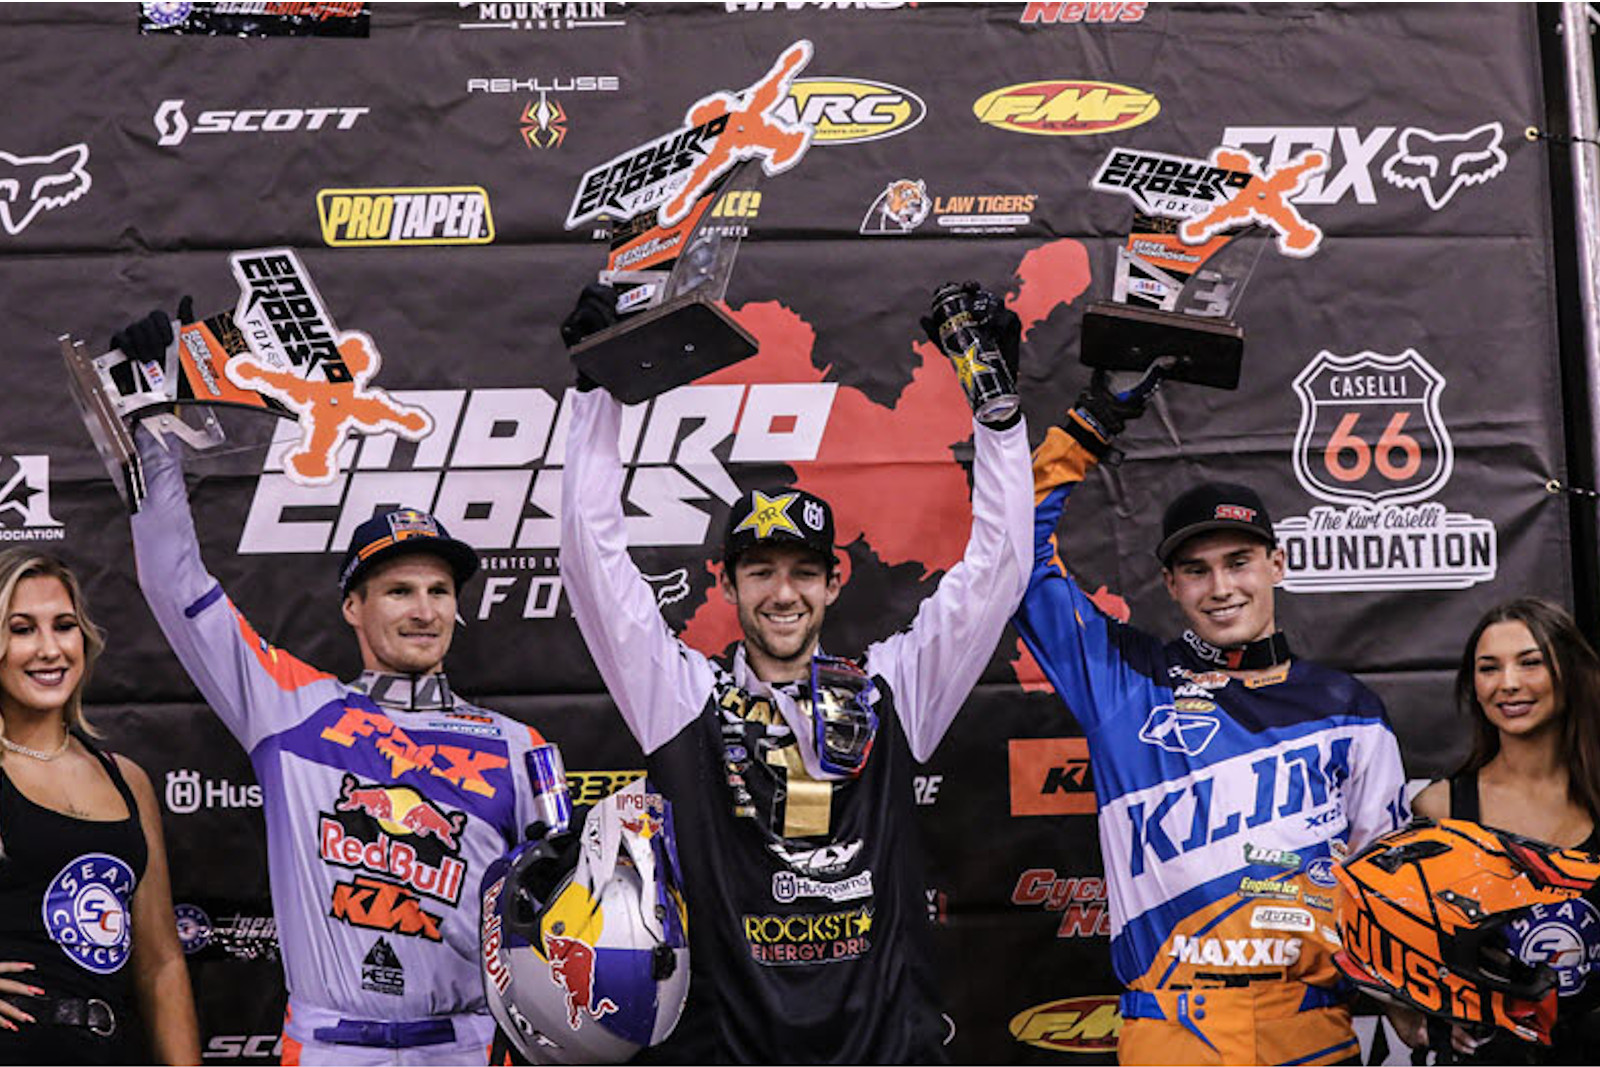 Results feed: Colton Haaker wins 2019 EnduroCross Championship